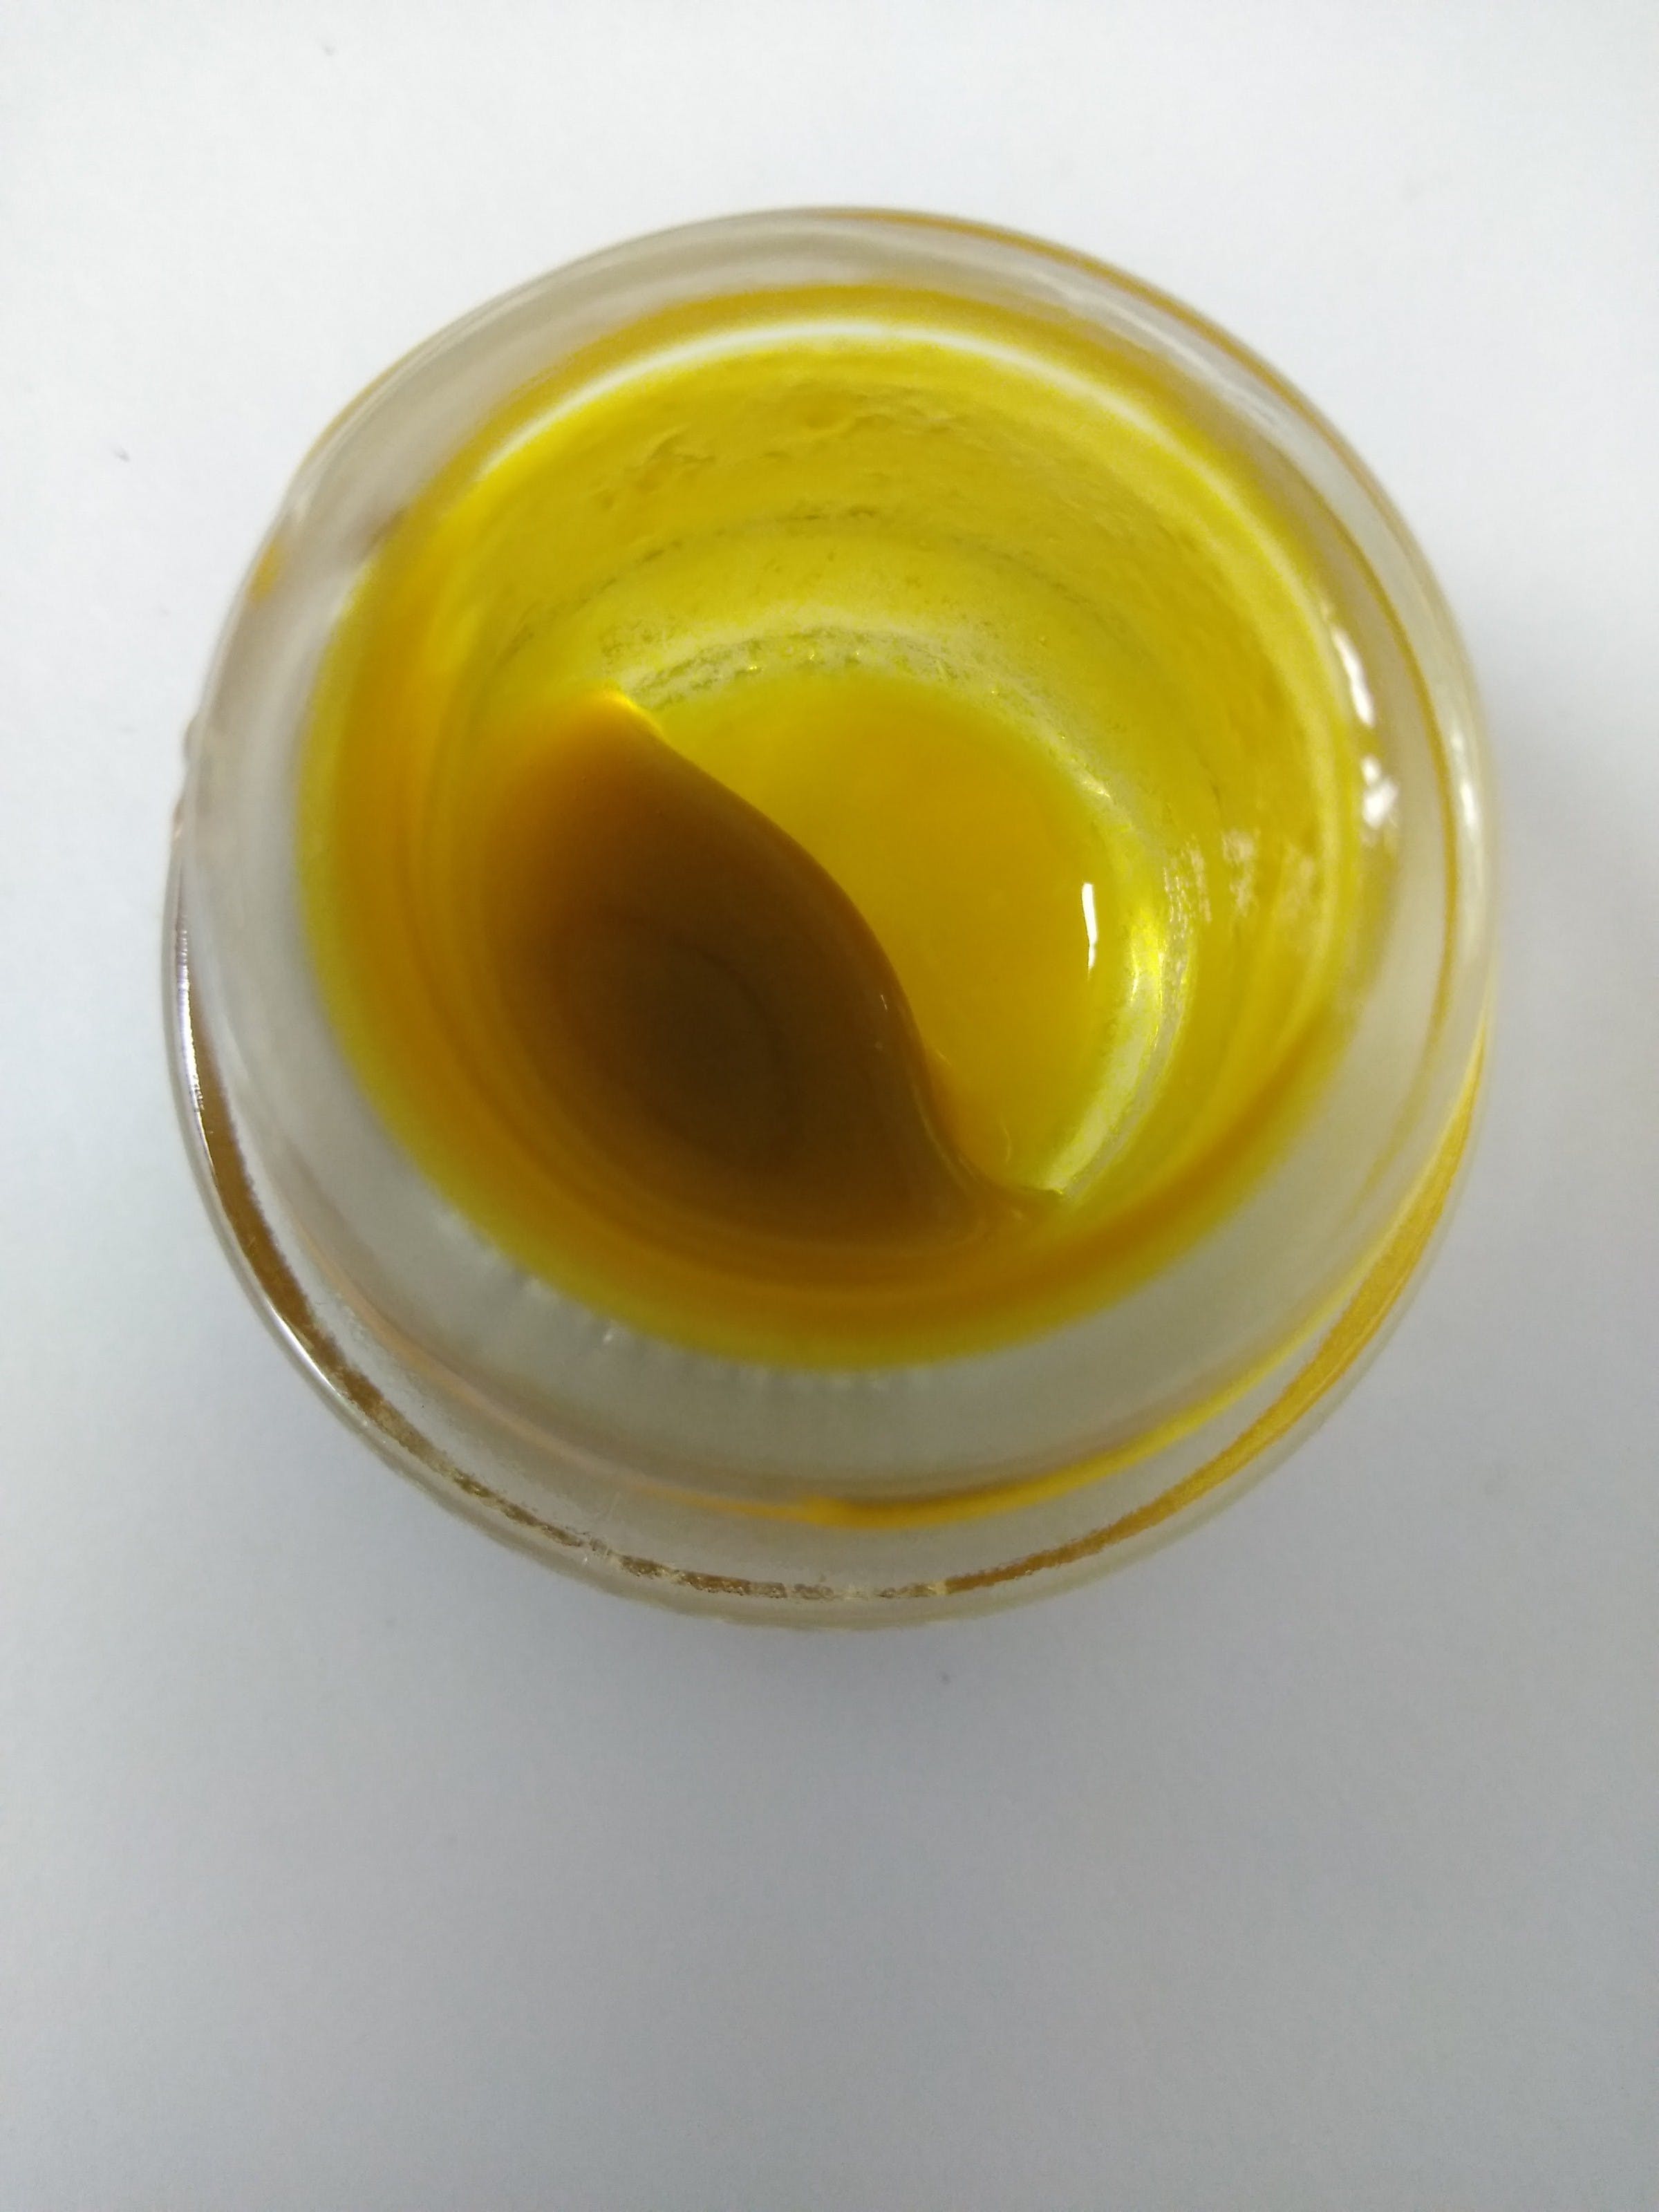 concentrate-4g-sauce-by-the-honeydew-creek-orginal-family